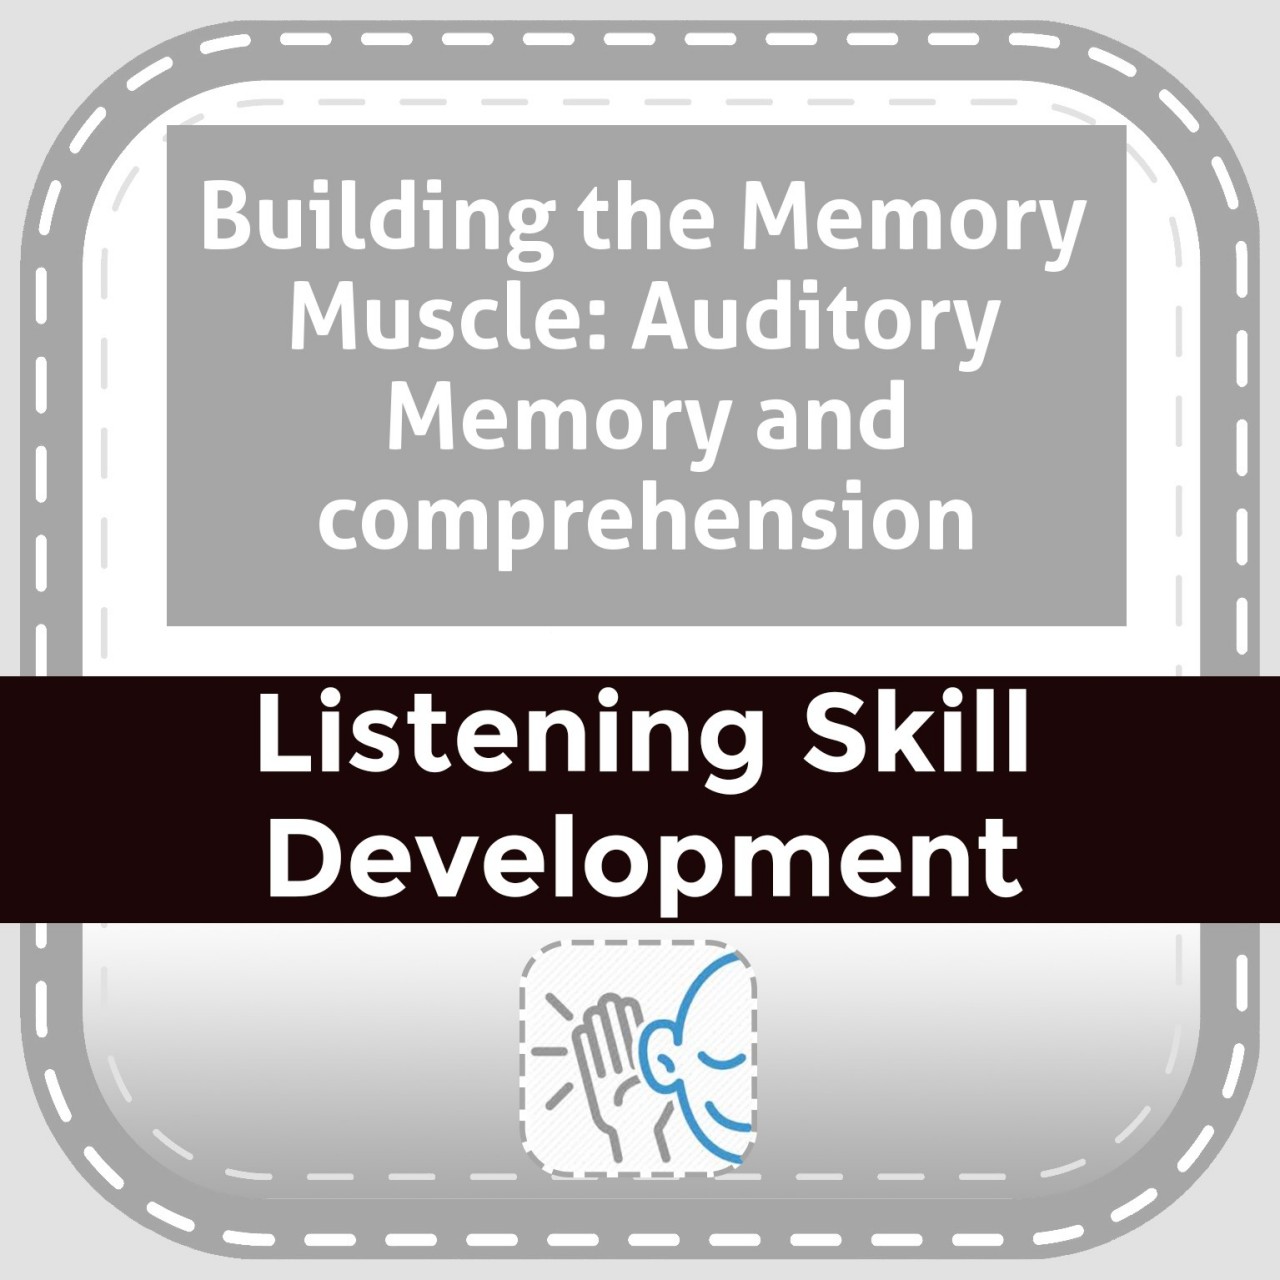 Building the Memory Muscle: Auditory Memory and comprehension